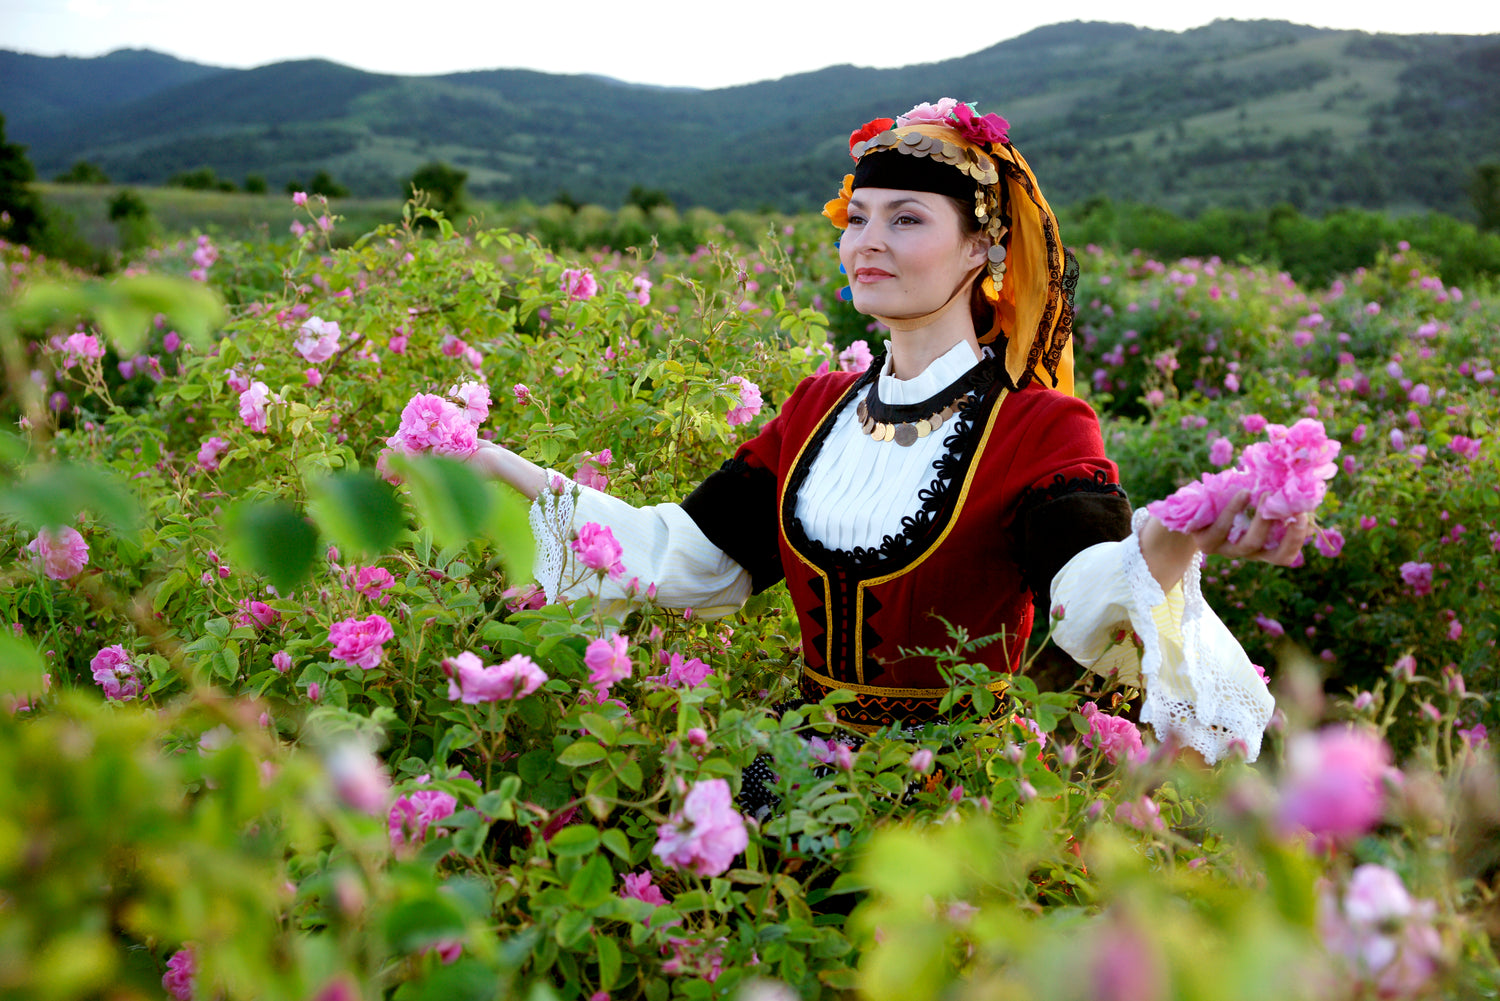 A woman in traditional dress surrounded by a sea of rose fields.